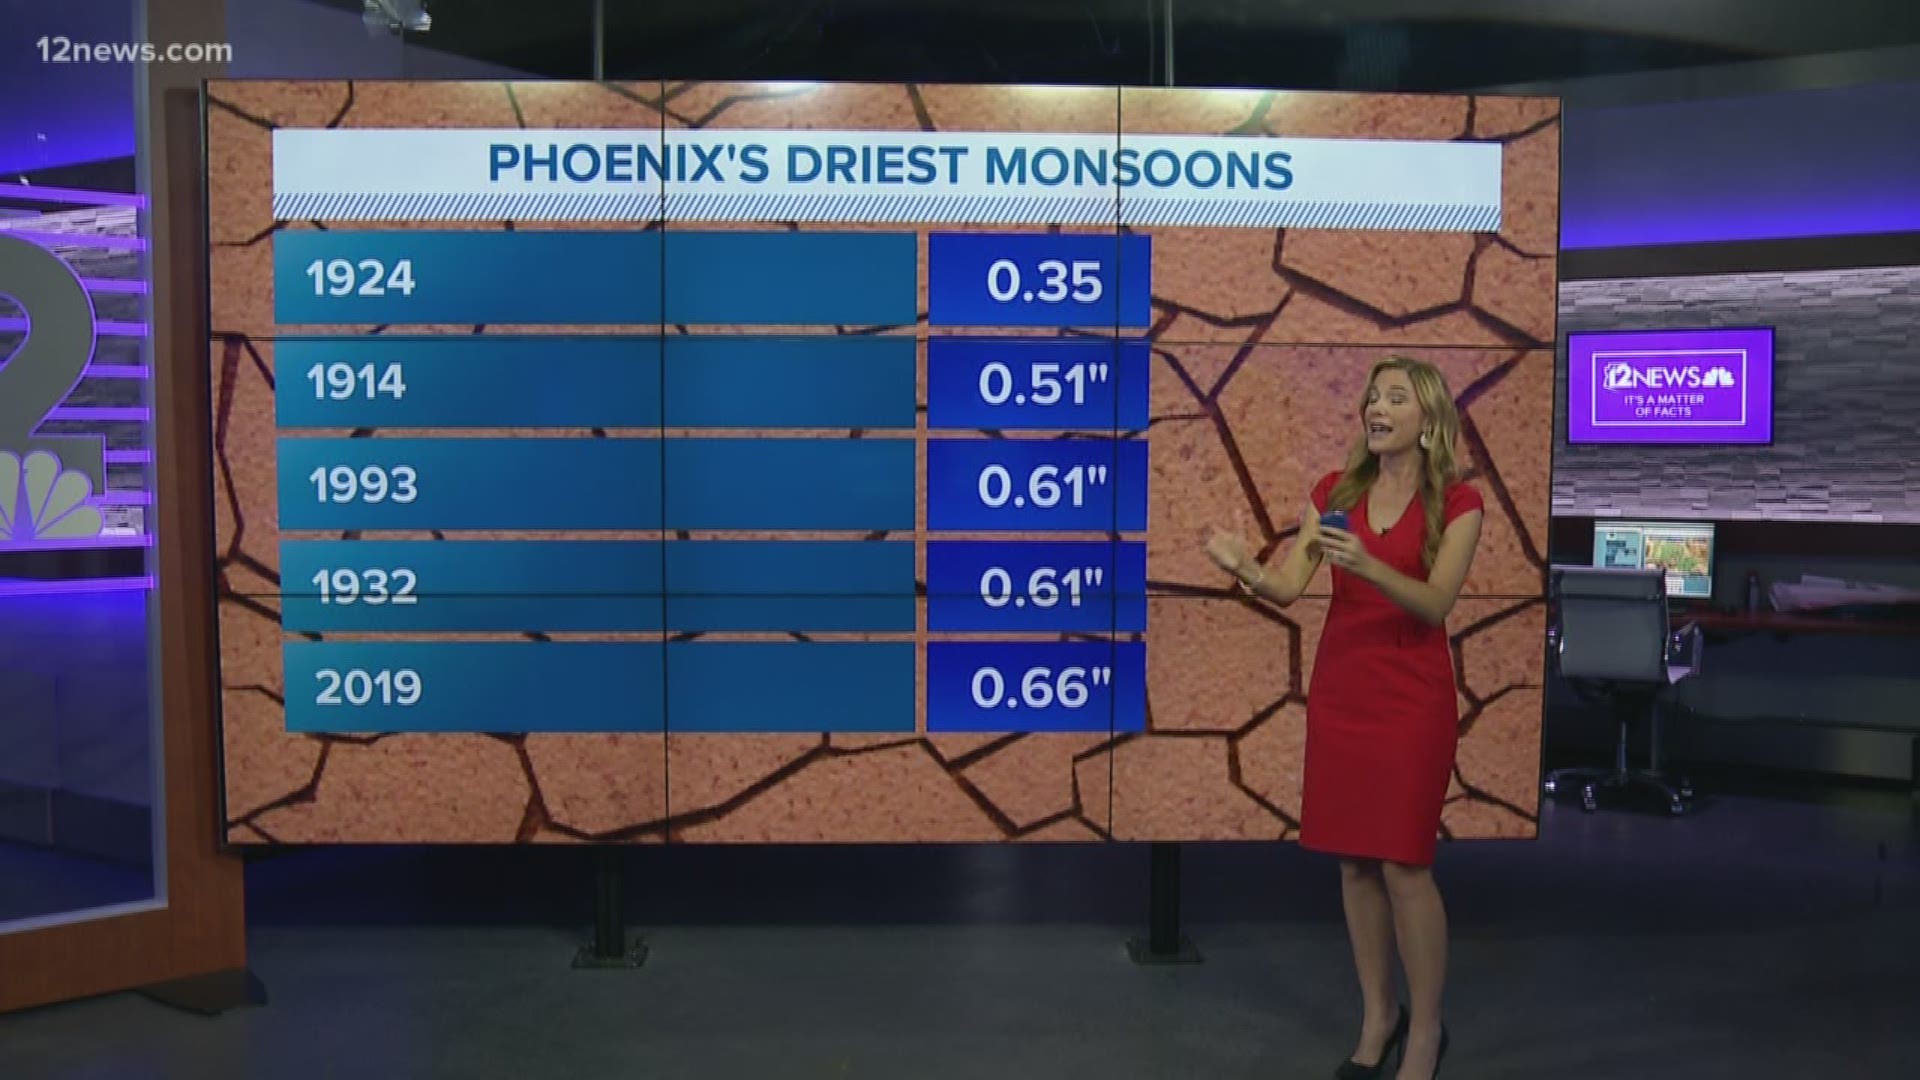 Monday is the final day of Monsoon 2019. And this year's monsoon will go down as the fifth driest in the Phoenix's history and the driest of all time for Flagstaff.